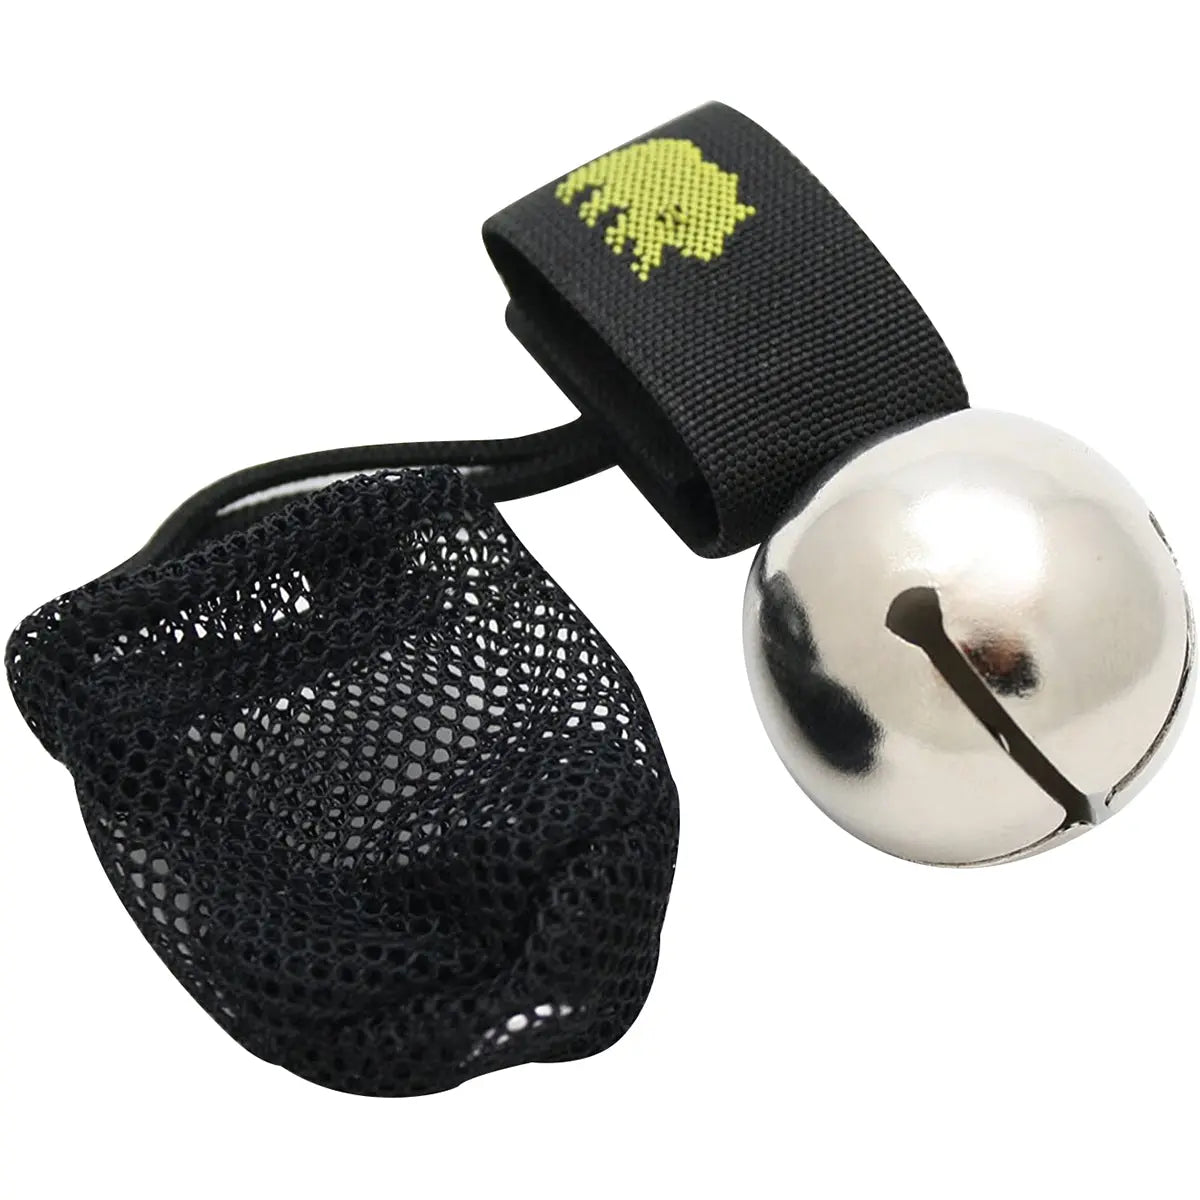 Coghlan's Bear Bell w/ Magnetic Silencer & Carry Strap for Hiking Safety, Silver Coghlan's